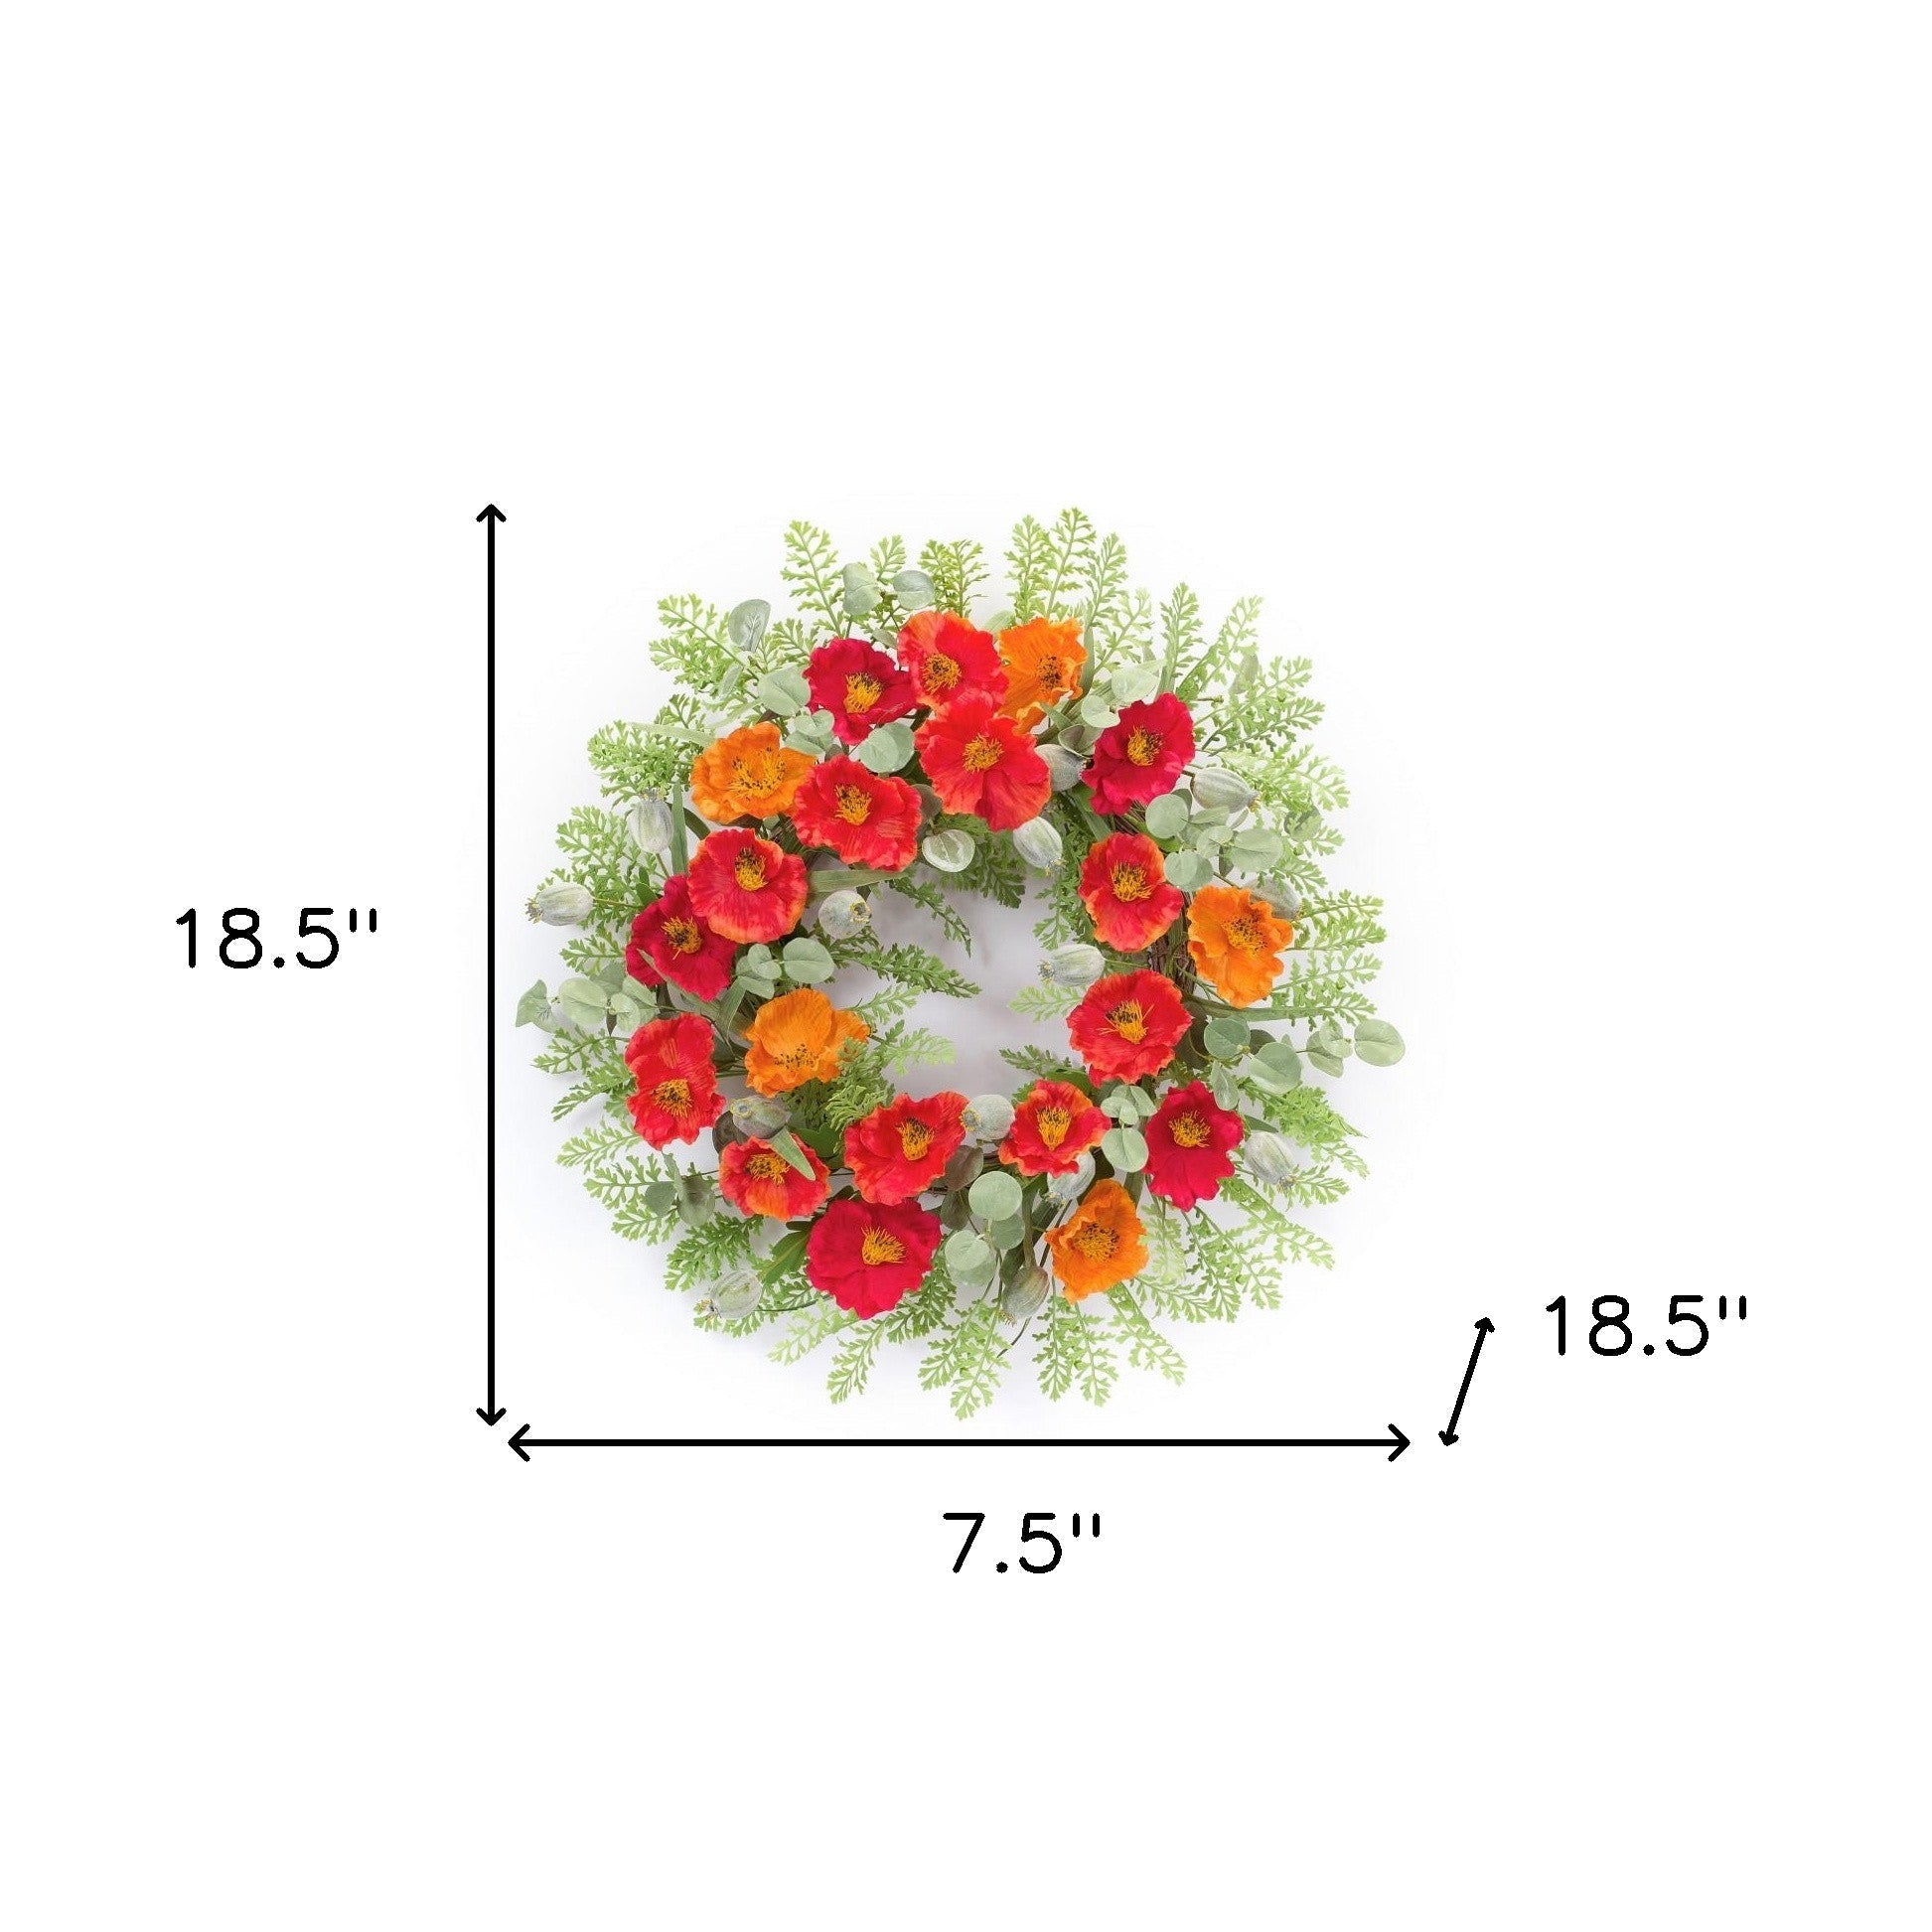 19" Red Orange Artificial Poppy Wreath - Tuesday Morning-Wreaths